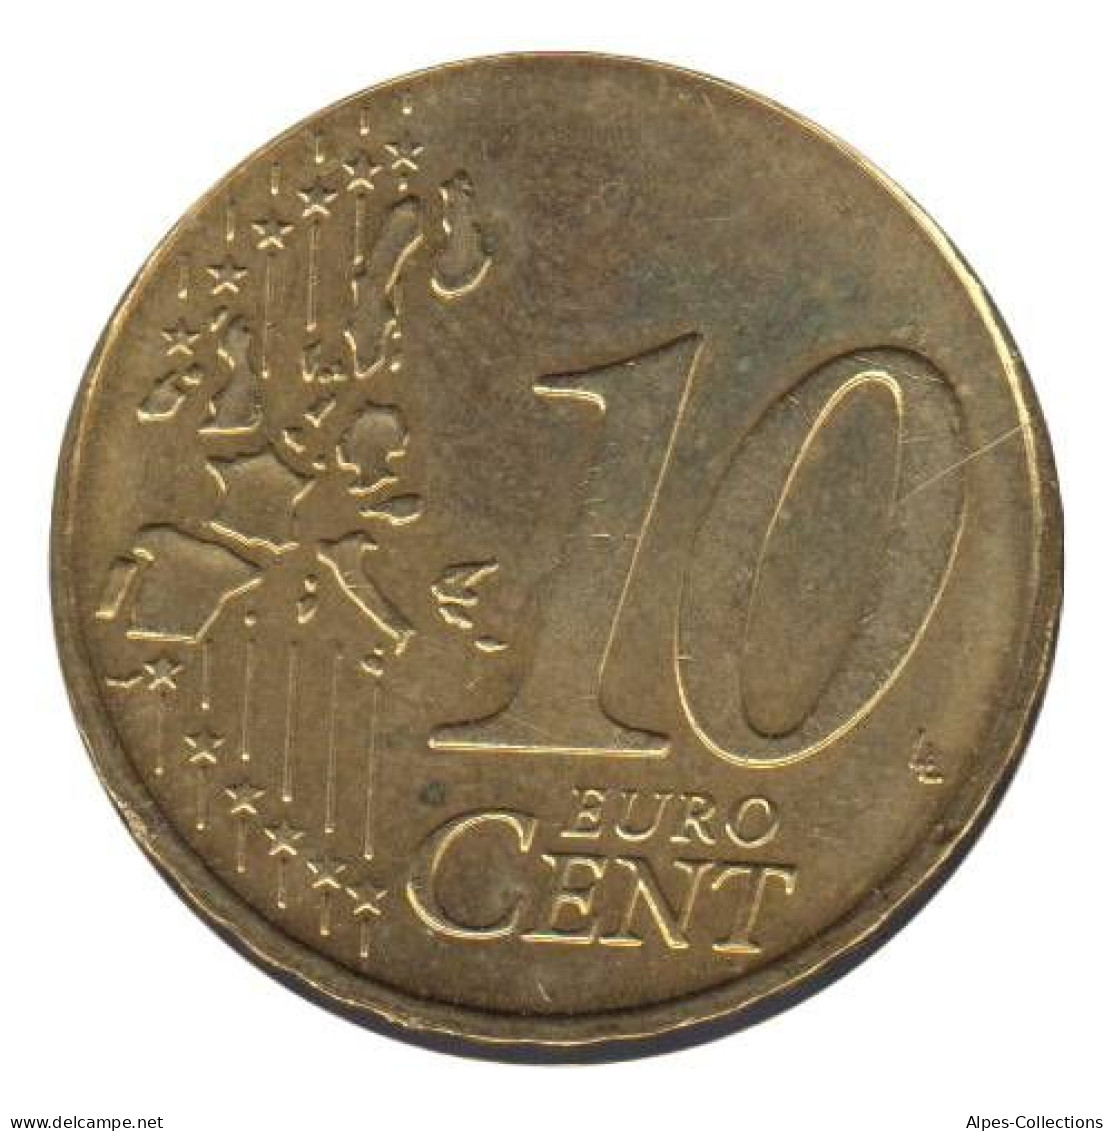 AL01002.1F - ALLEMAGNE - 10 Cents D'euro - 2002 F - Germania